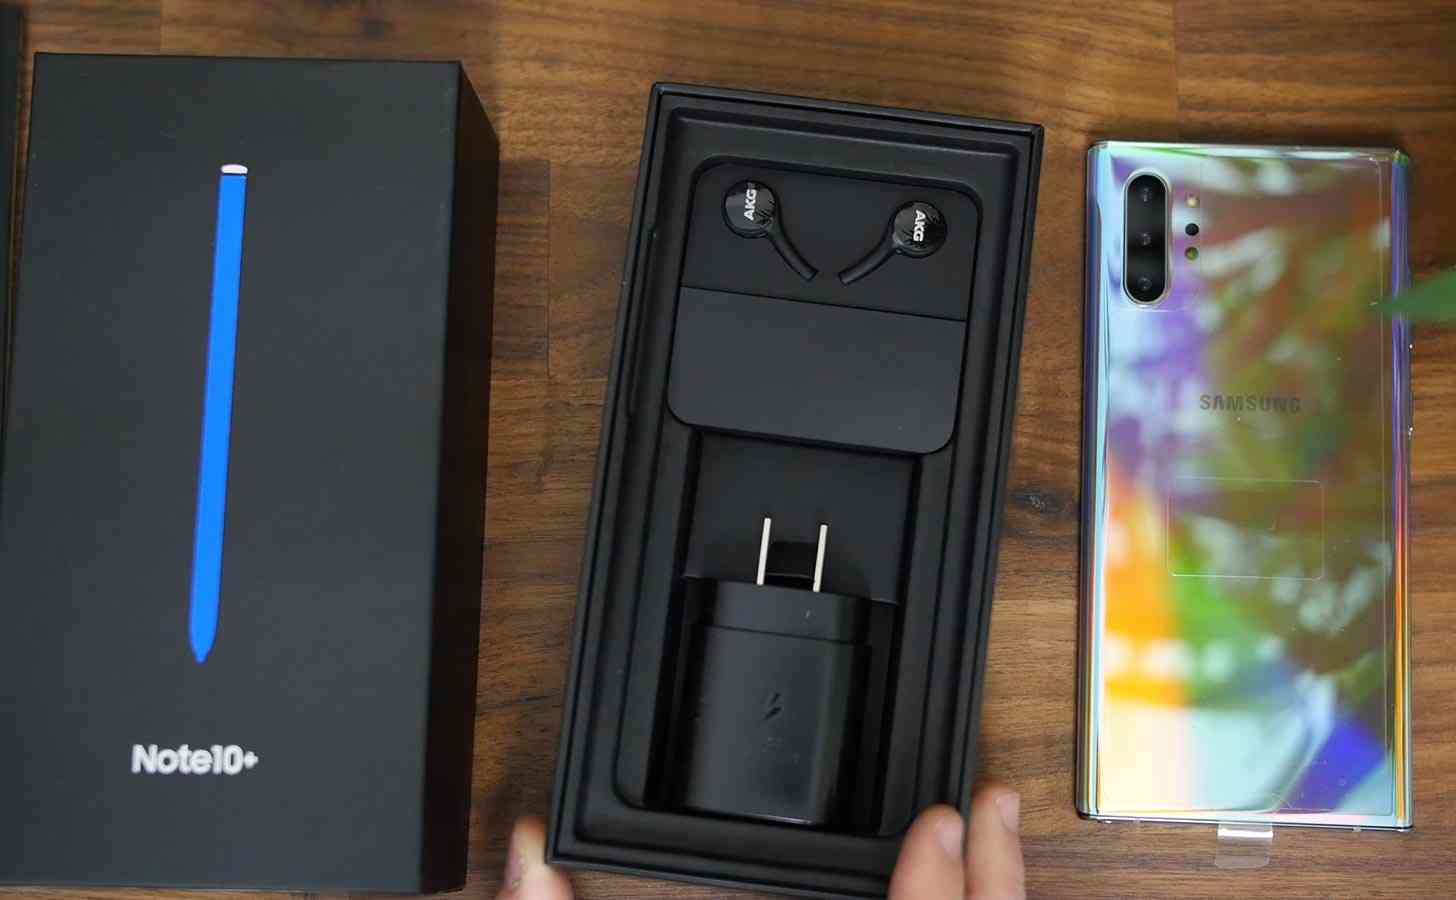 Samsung Galaxy Note 10+ unboxing